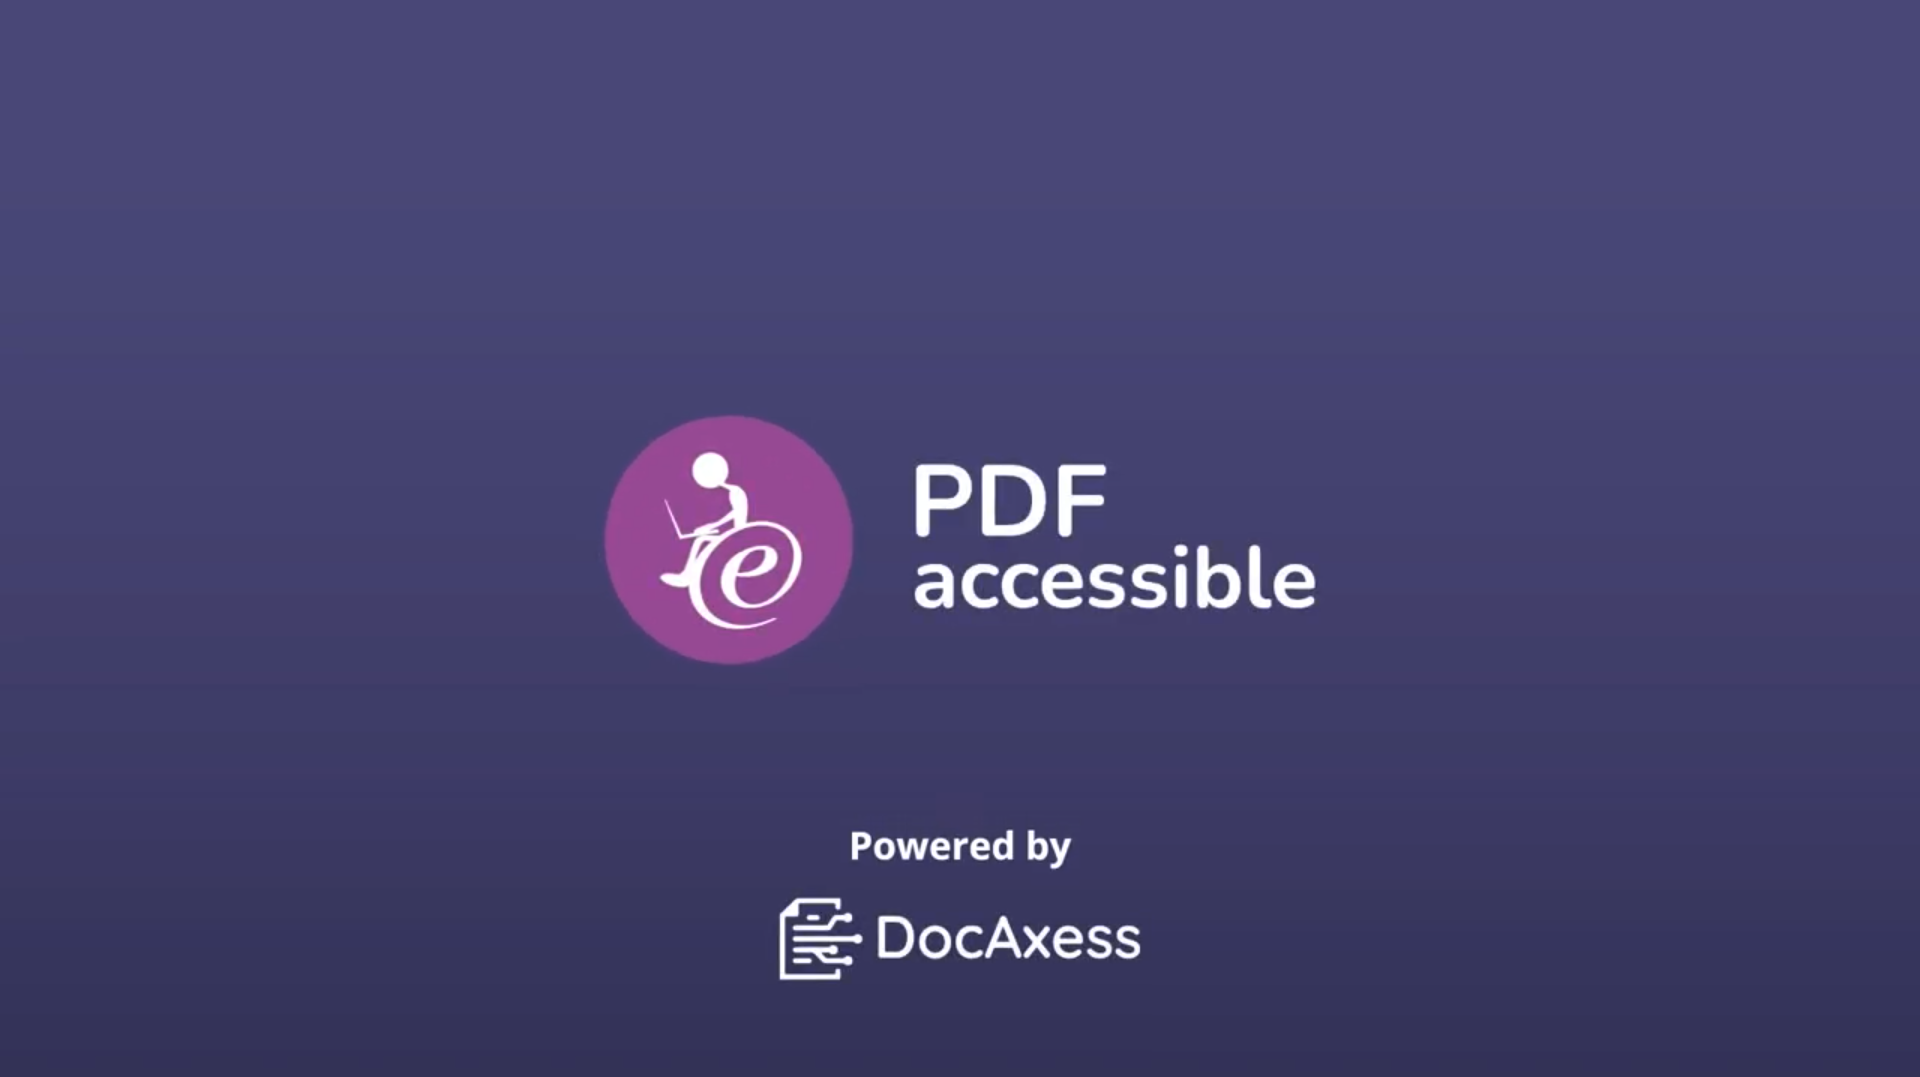 PDF accessible - Powered by DocAxess